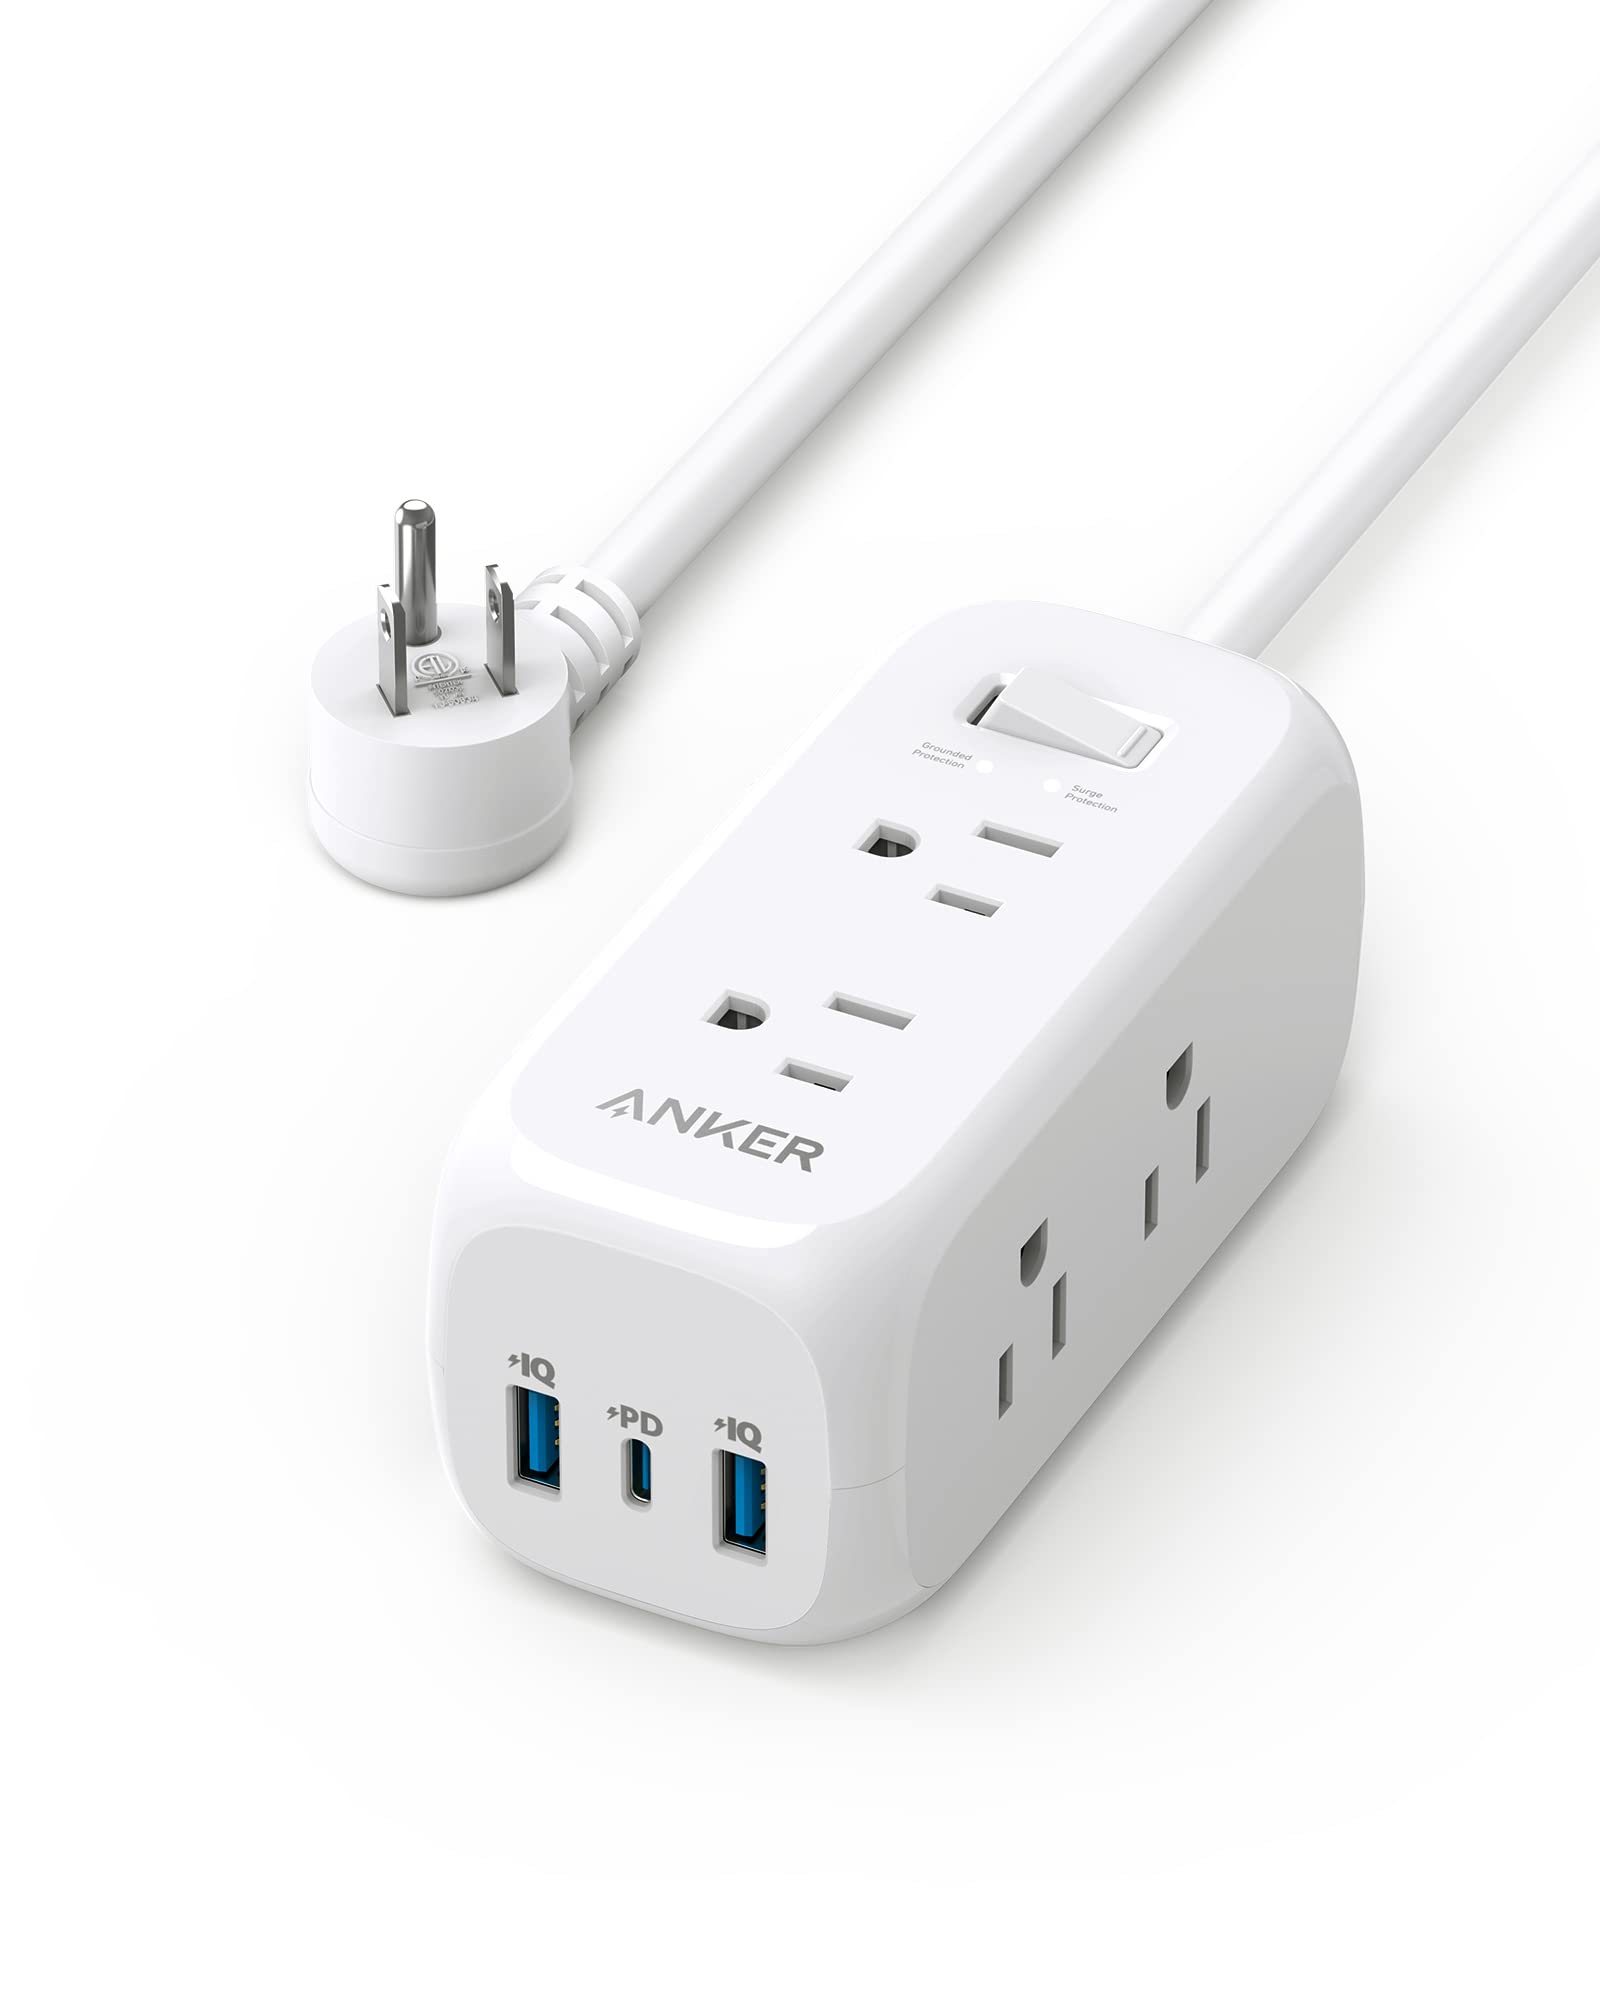 Anker 332 Power Strip 300J Surge Protector w/ 6x AC Outlets, 2x USB & 1x USB-C (20W Max) $14 + Free Shipping w/ Prime or $35+